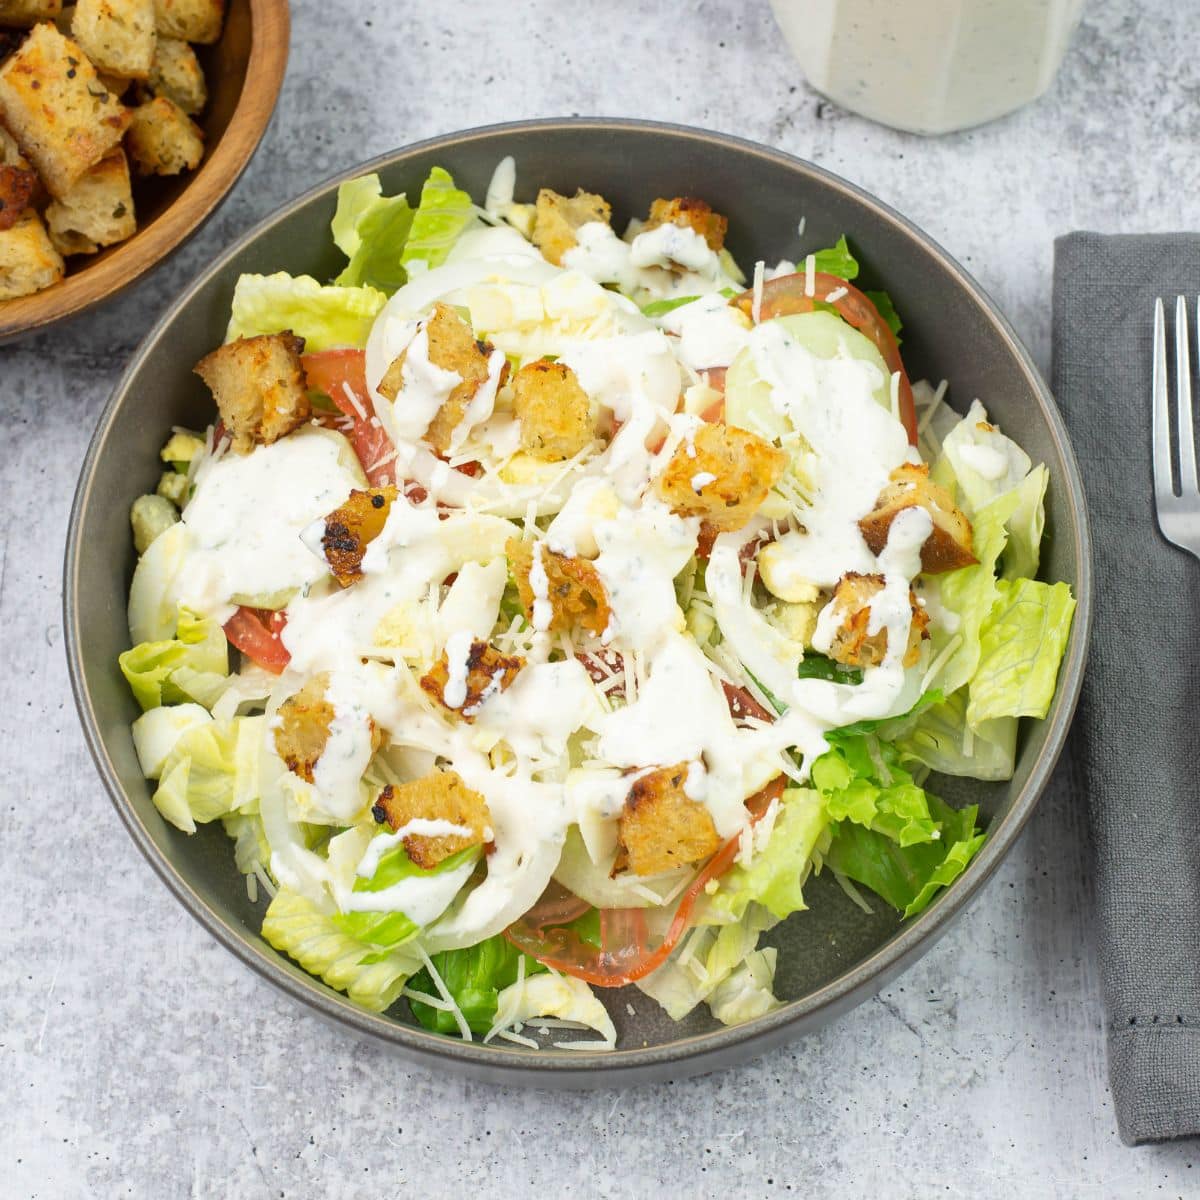 A large salad drizzled with homemade buttermilk ranch dressing.